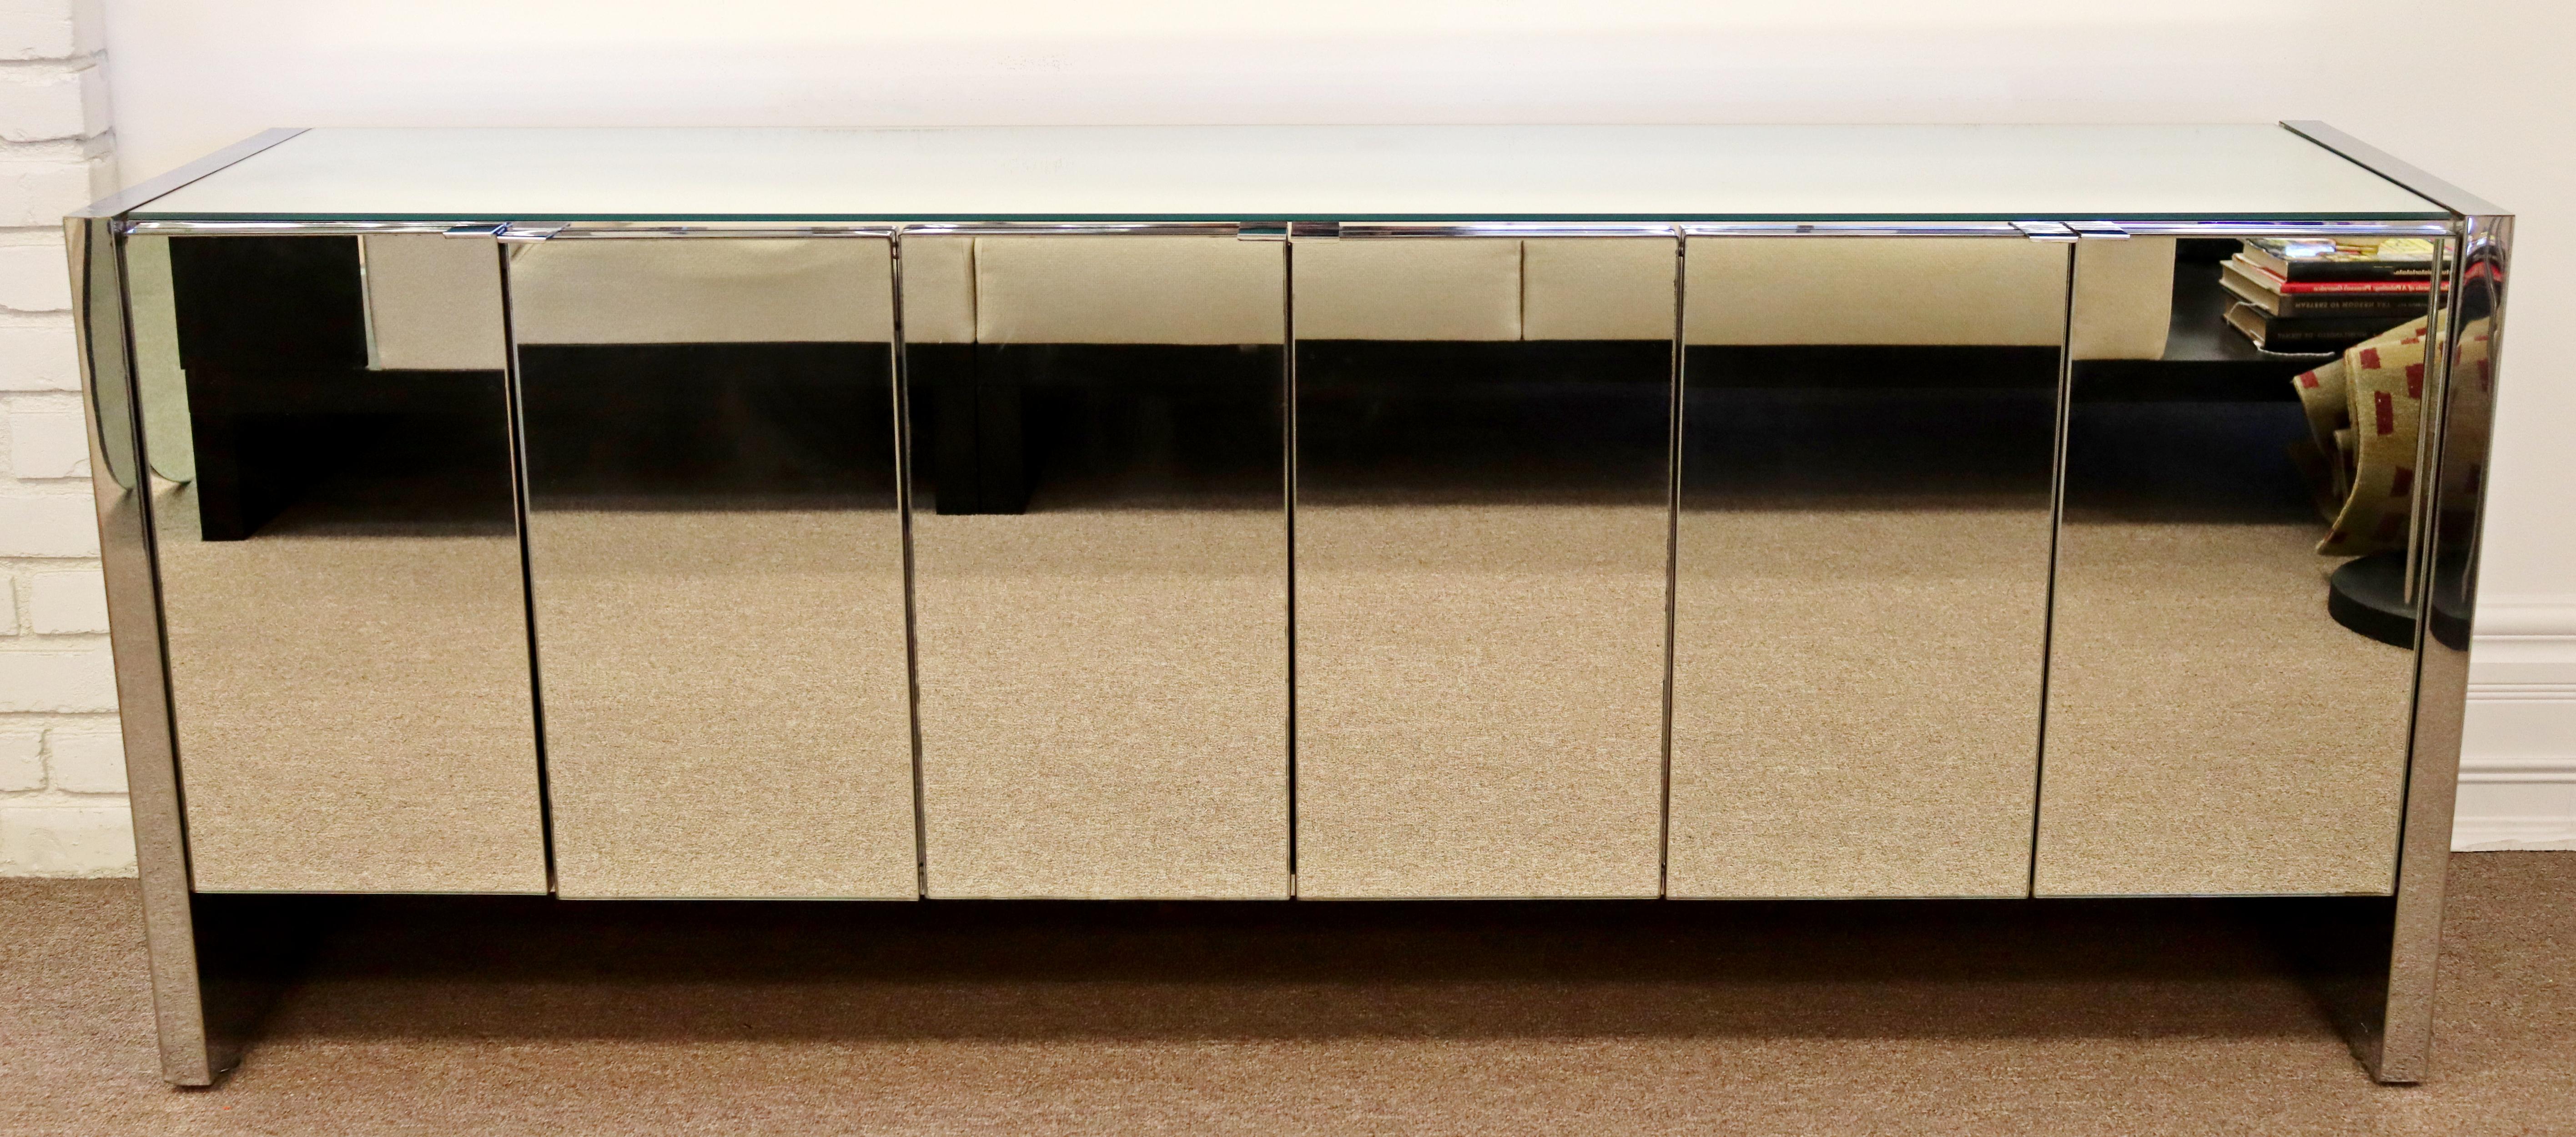 For your consideration is an elegant, mirrored credenza, with chrome trim, by Ello, circa the 1980s. In excellent vintage condition. The dimensions are 75